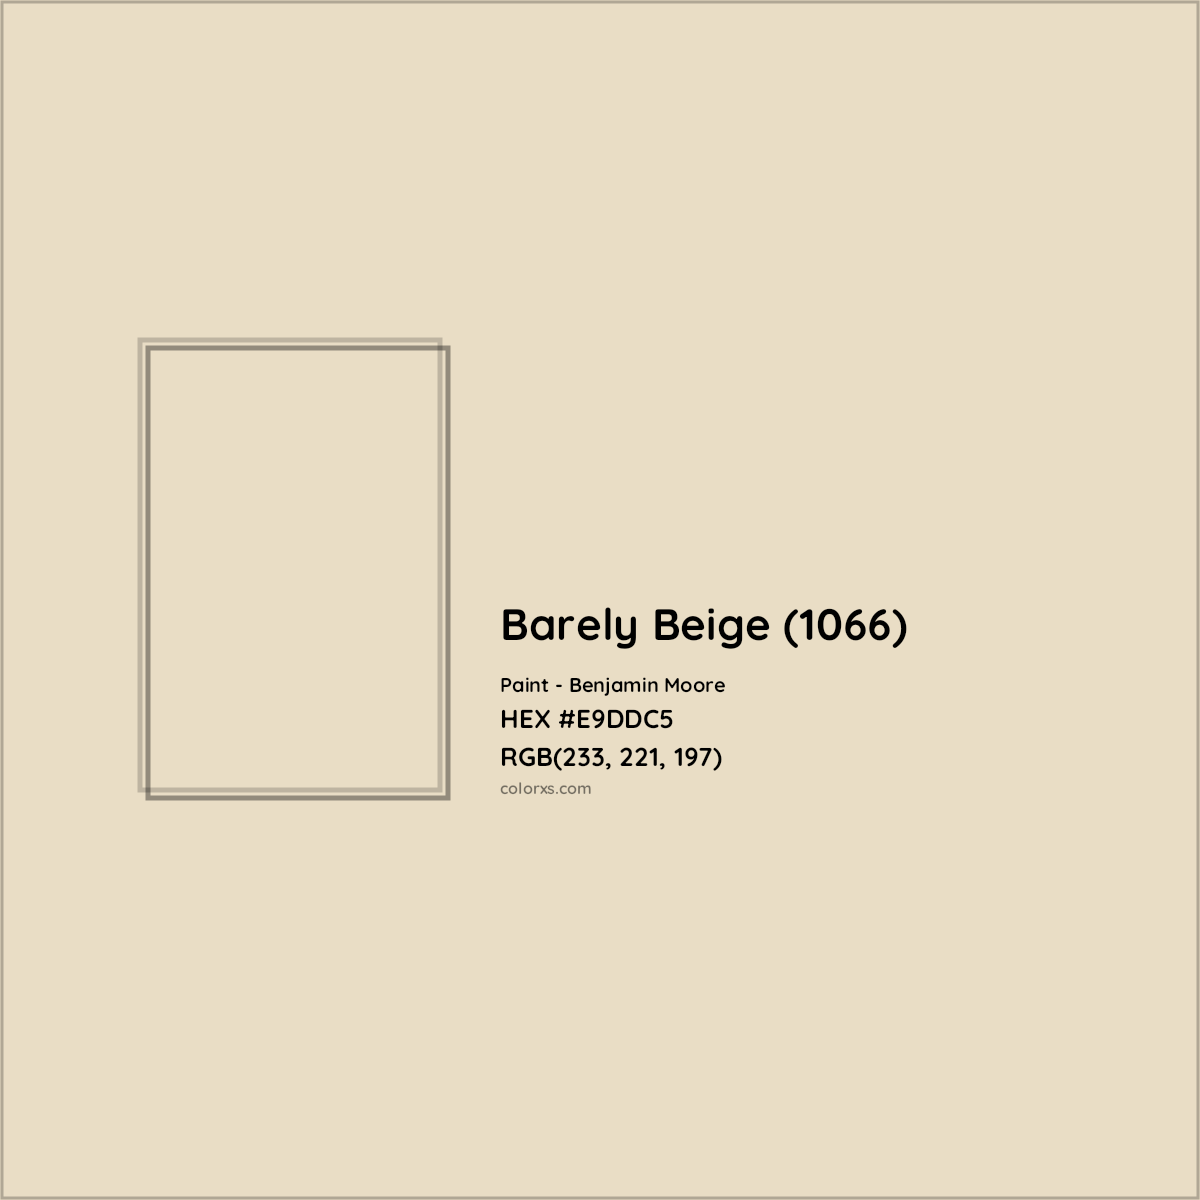 Benjamin Moore Barely Beige (1066) Paint color codes, similar